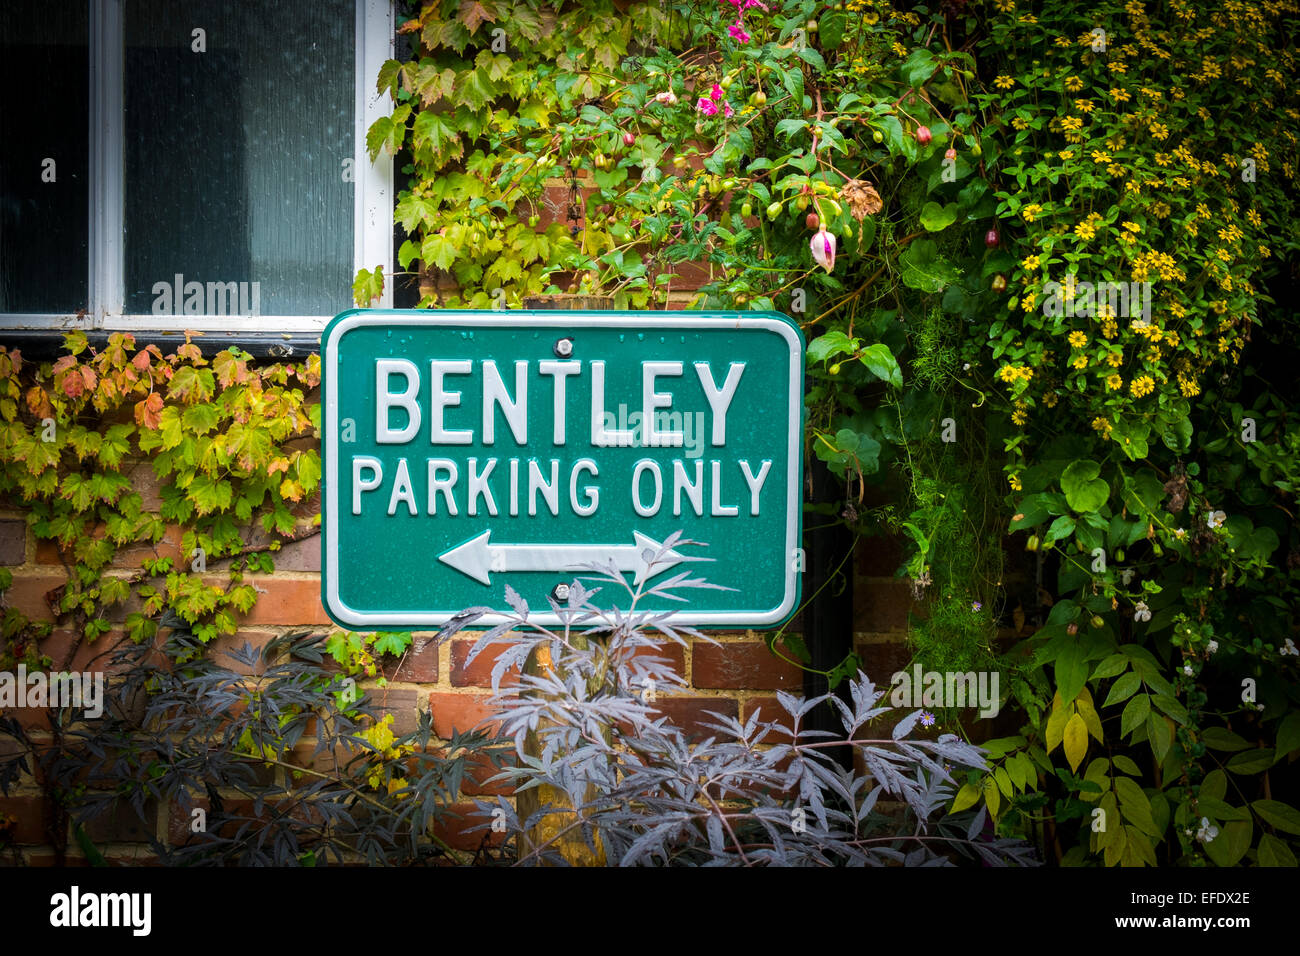 Bentley parking only metal sign in ivy growing on the side of a brick built house. Stock Photo